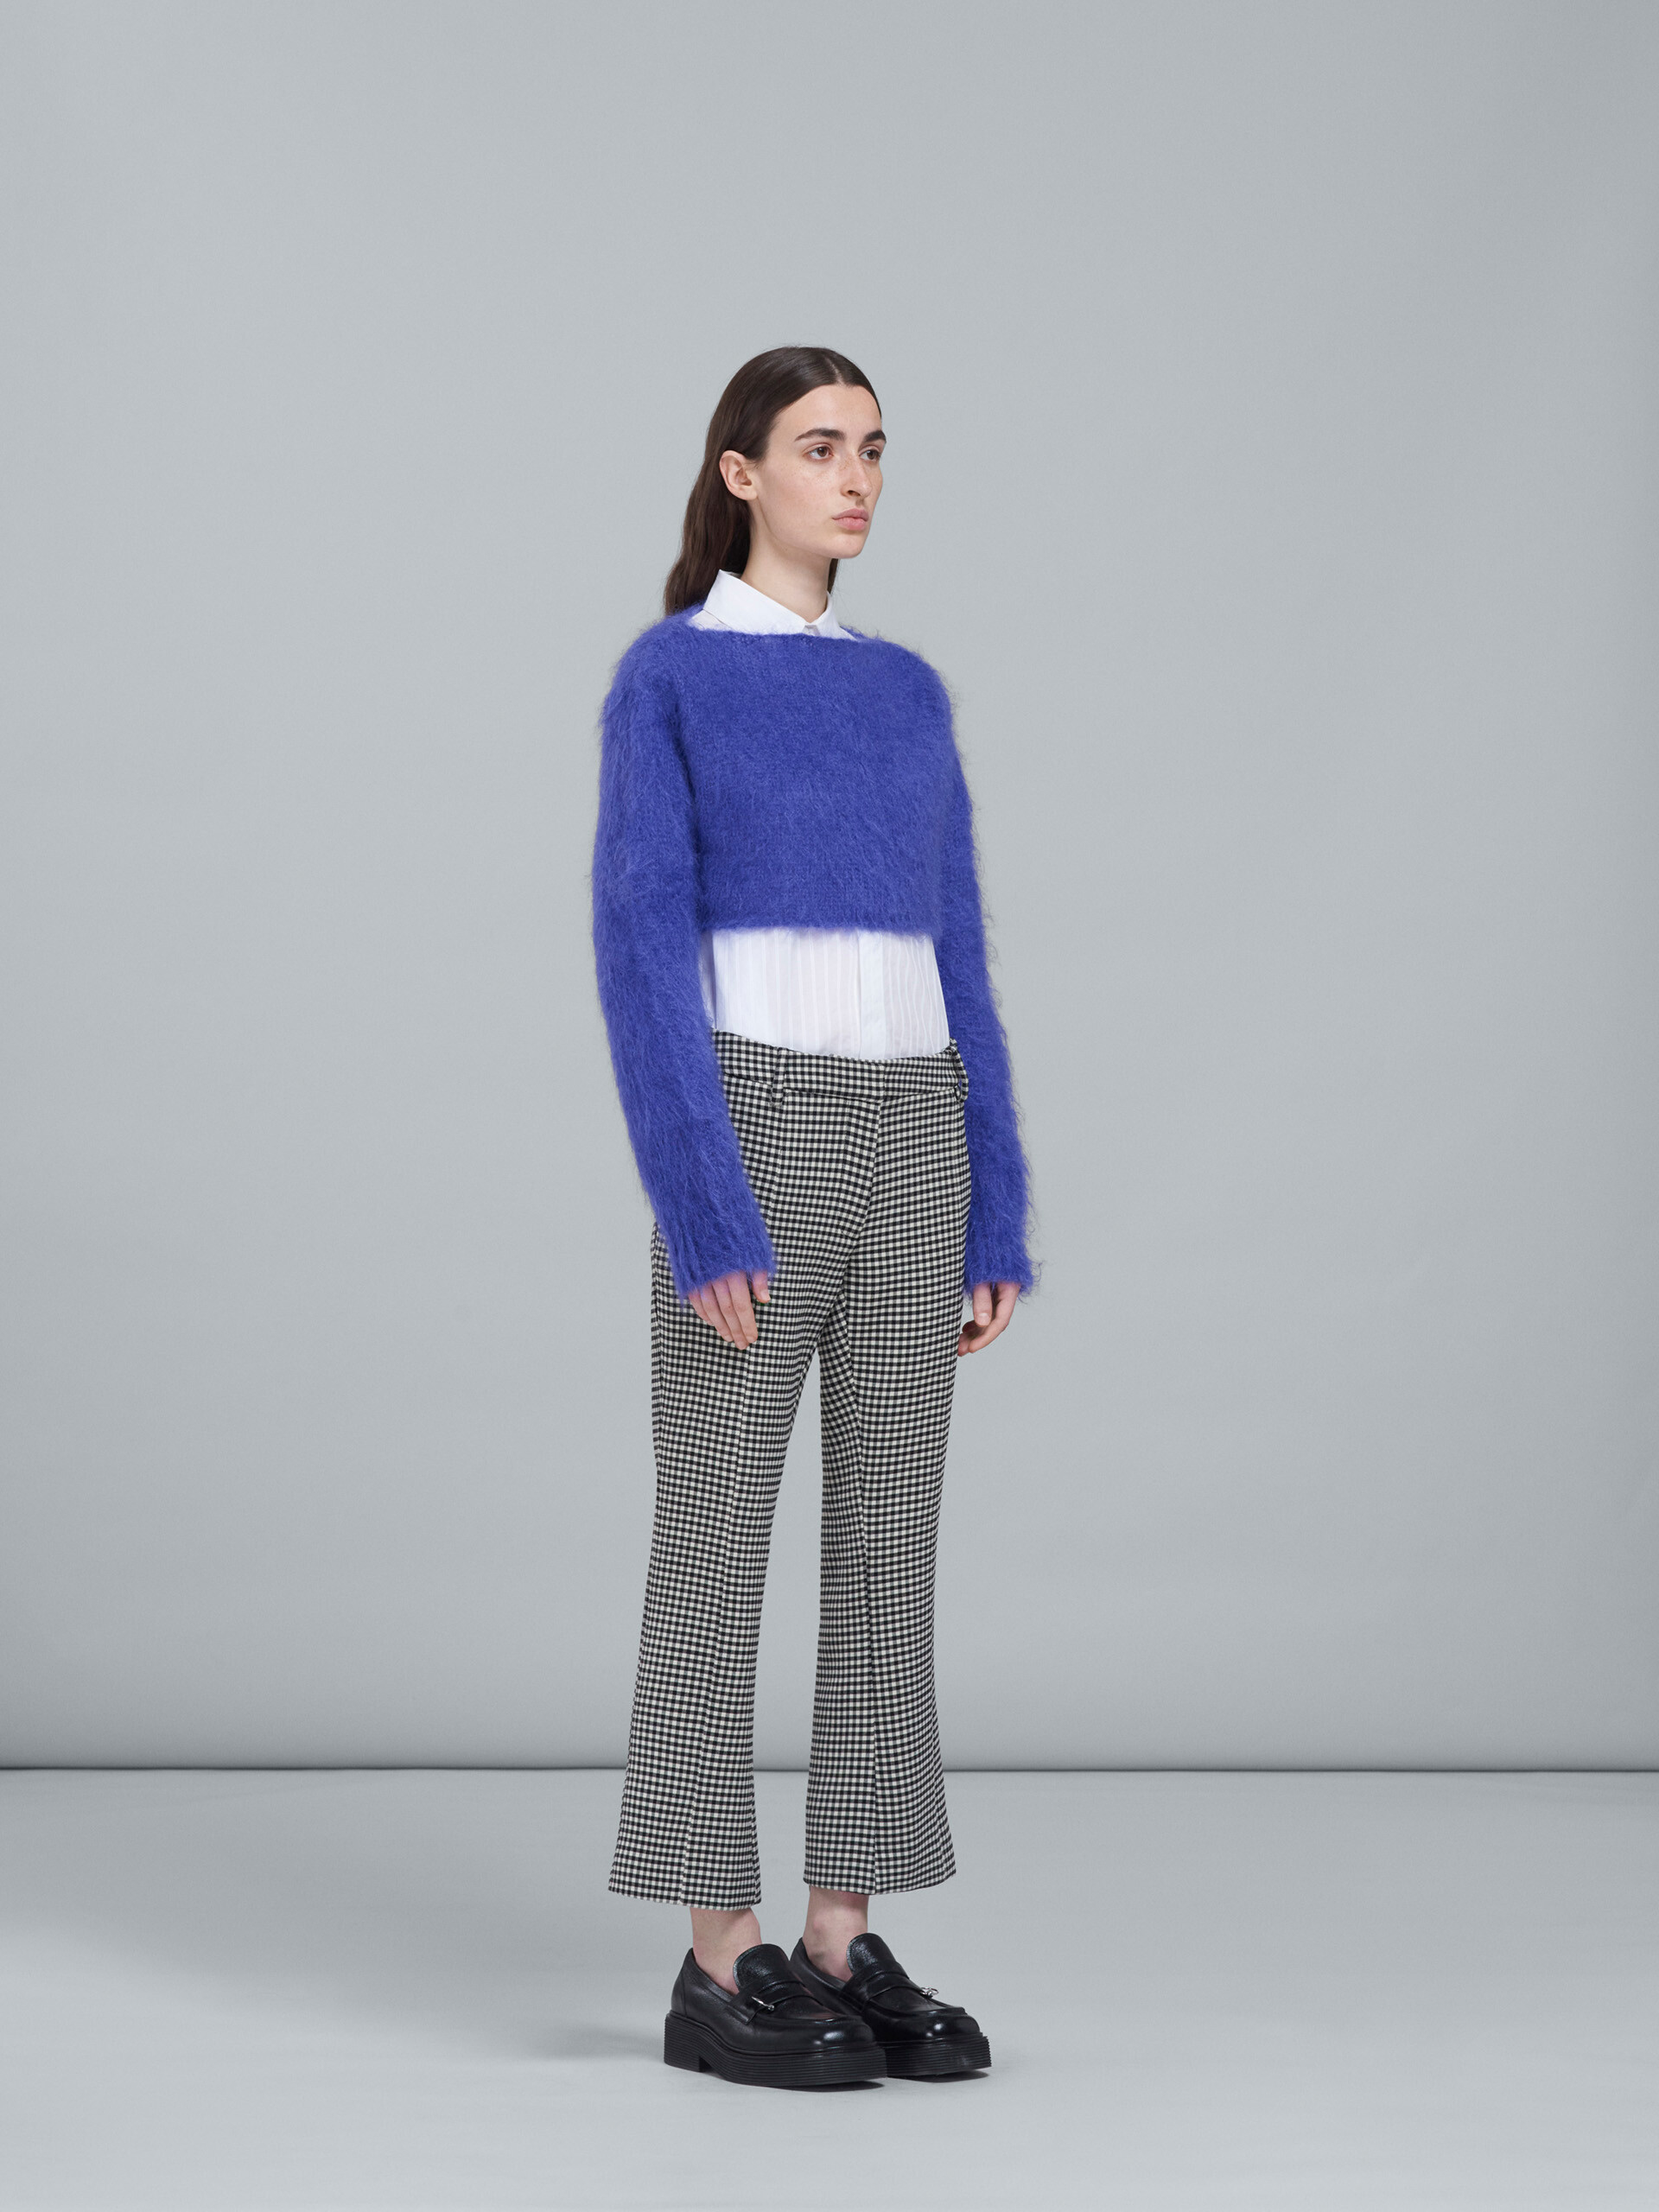 Mohair and wool crewneck cropped sweater - Pullovers - Image 5